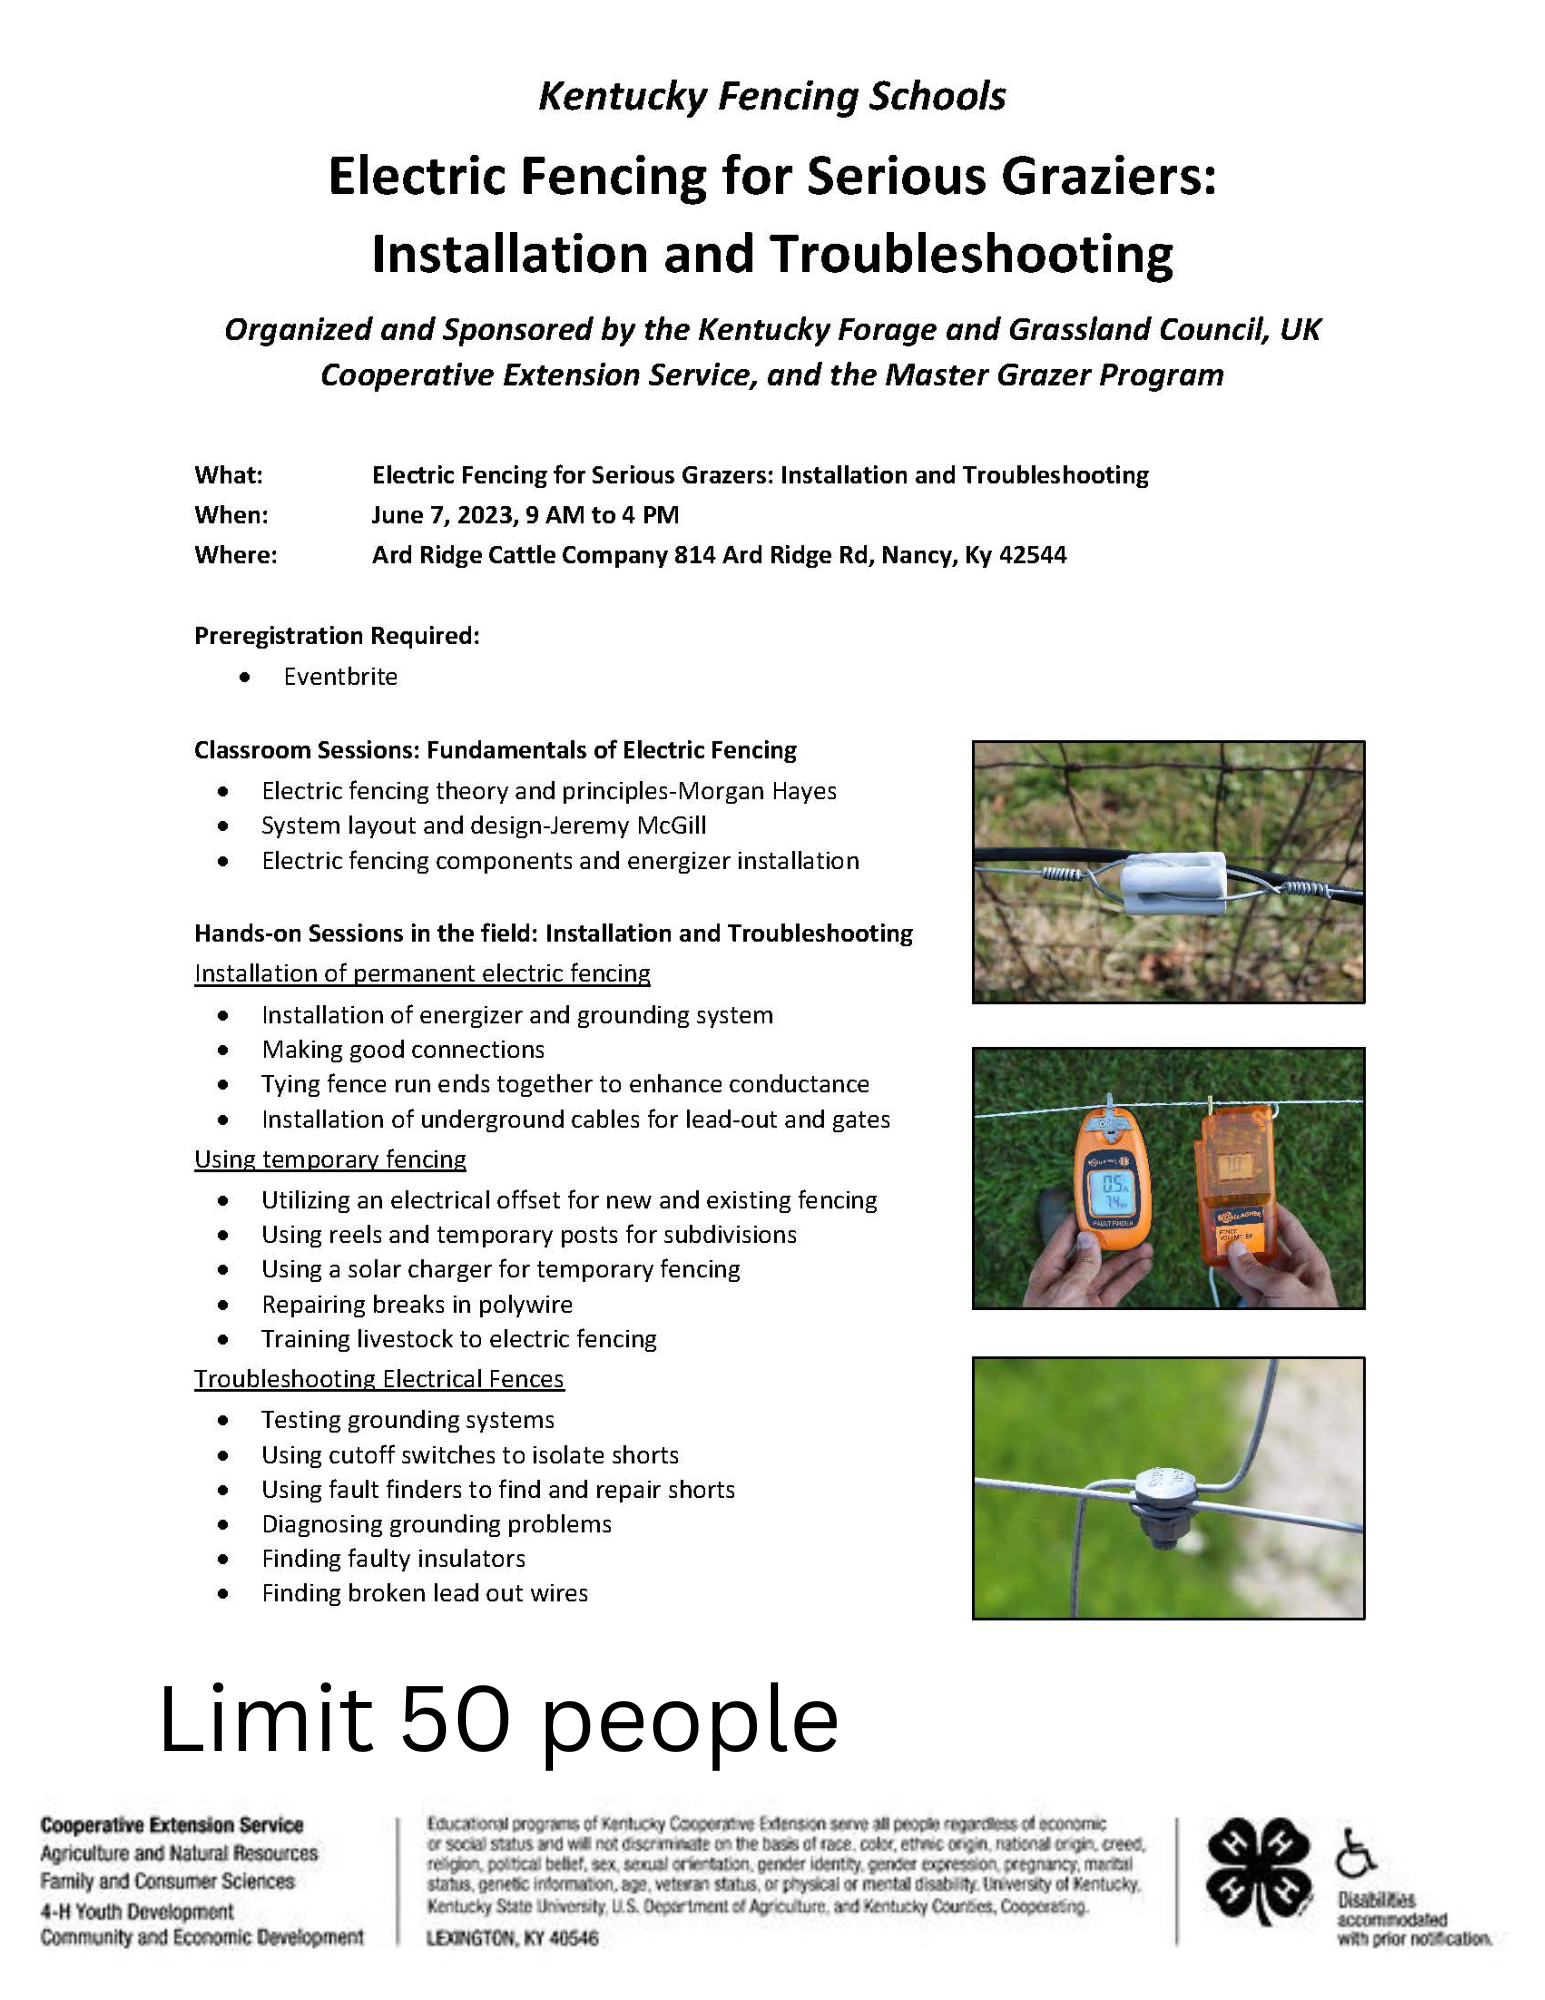 flyer for electric fencing for serious graziers installation and troubleshooting. June 7th at 9 am call 606-679-6361 for more information